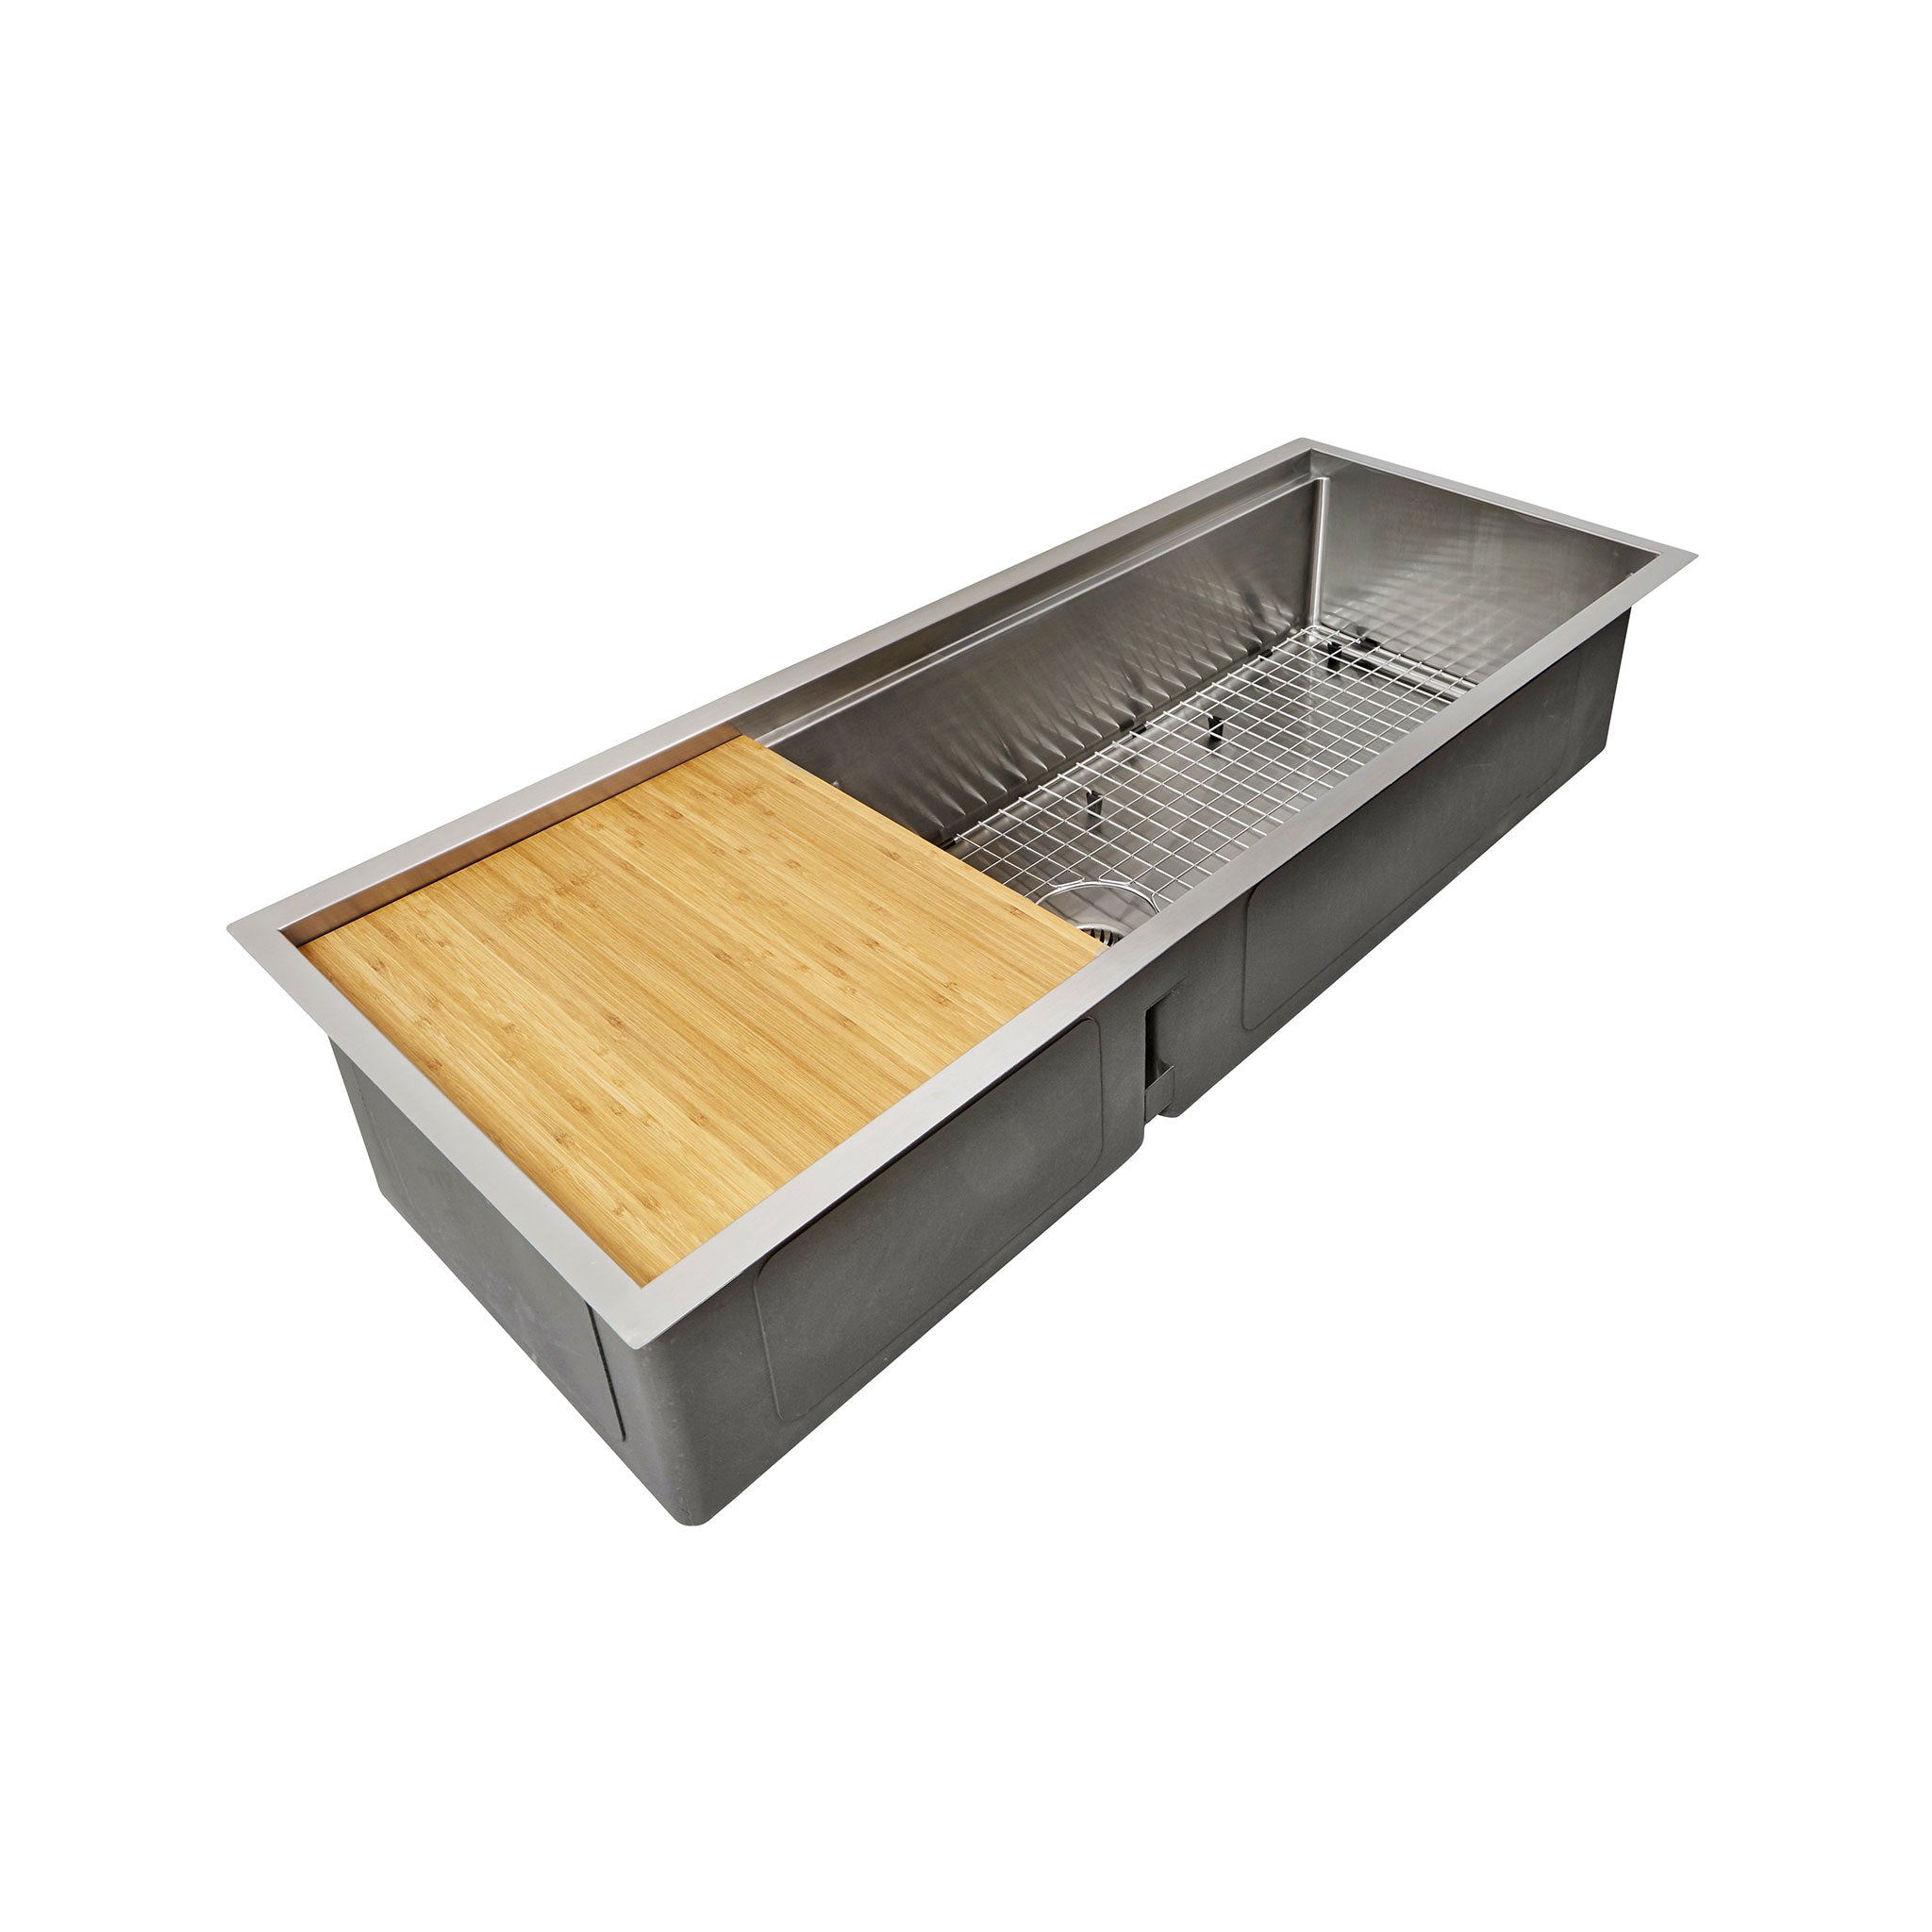 Create Good Sinks' double bowl workstation sink with basin grid and bamboo cutting board